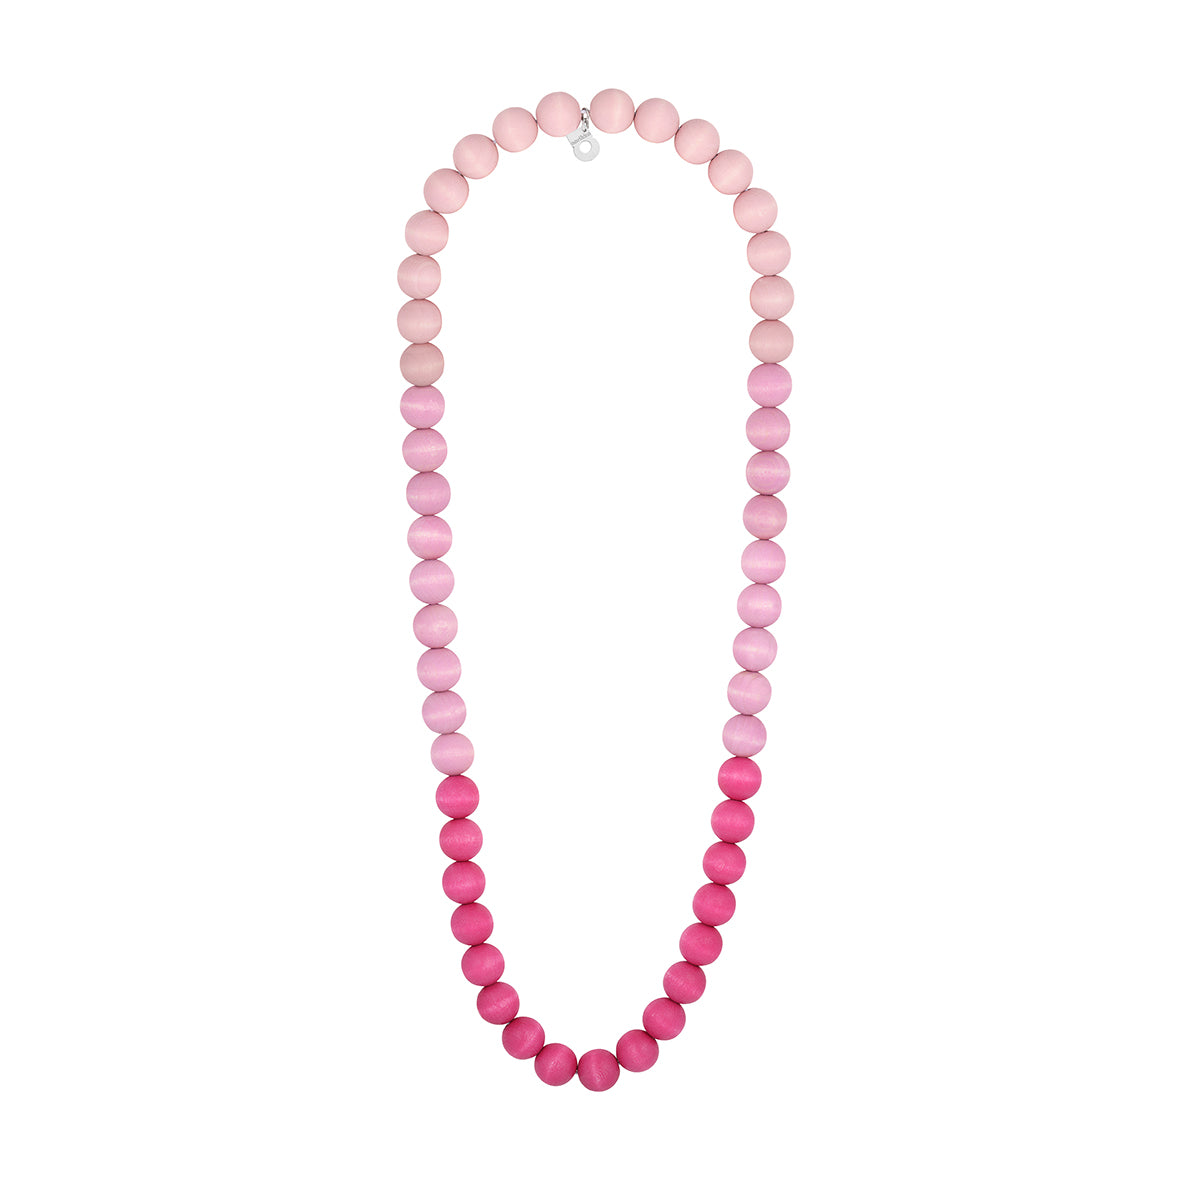 Suometar necklace, color options